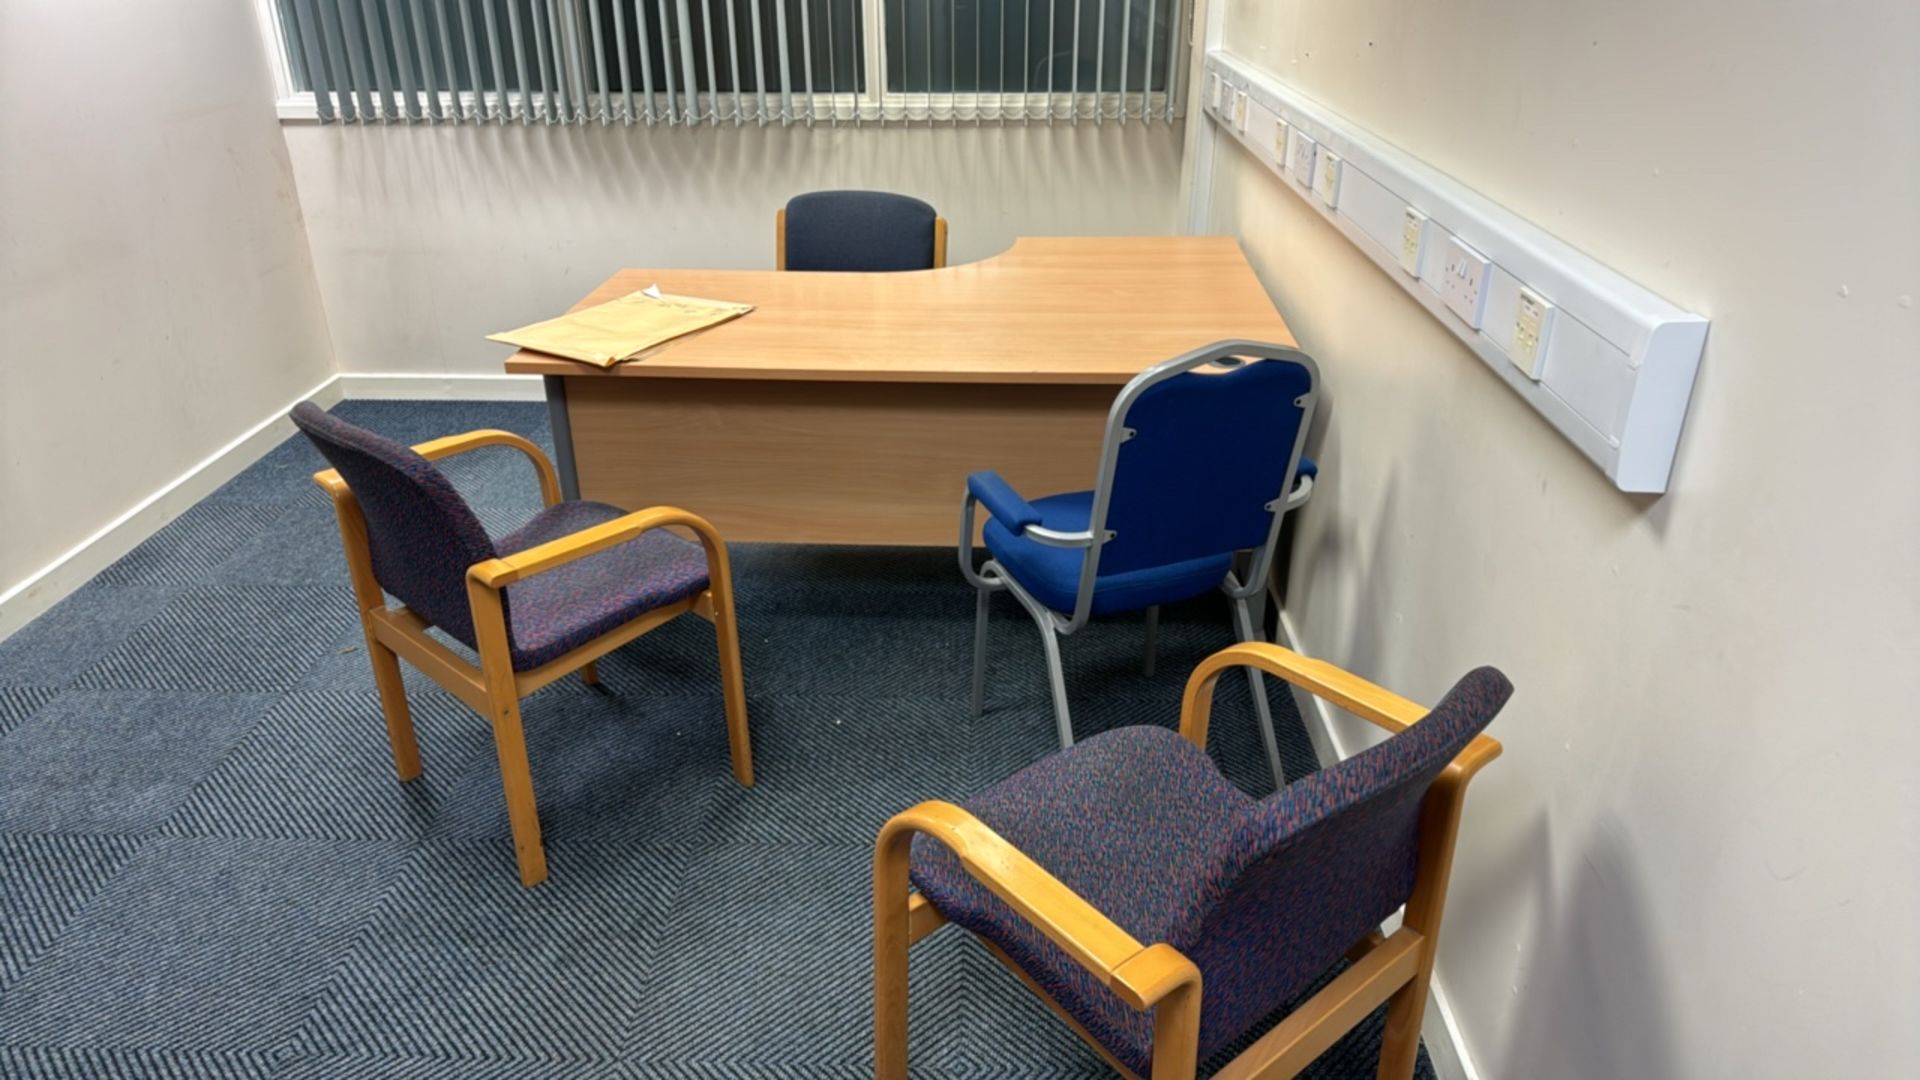 ref 301 - Contents Of Meeting Room - Image 2 of 9